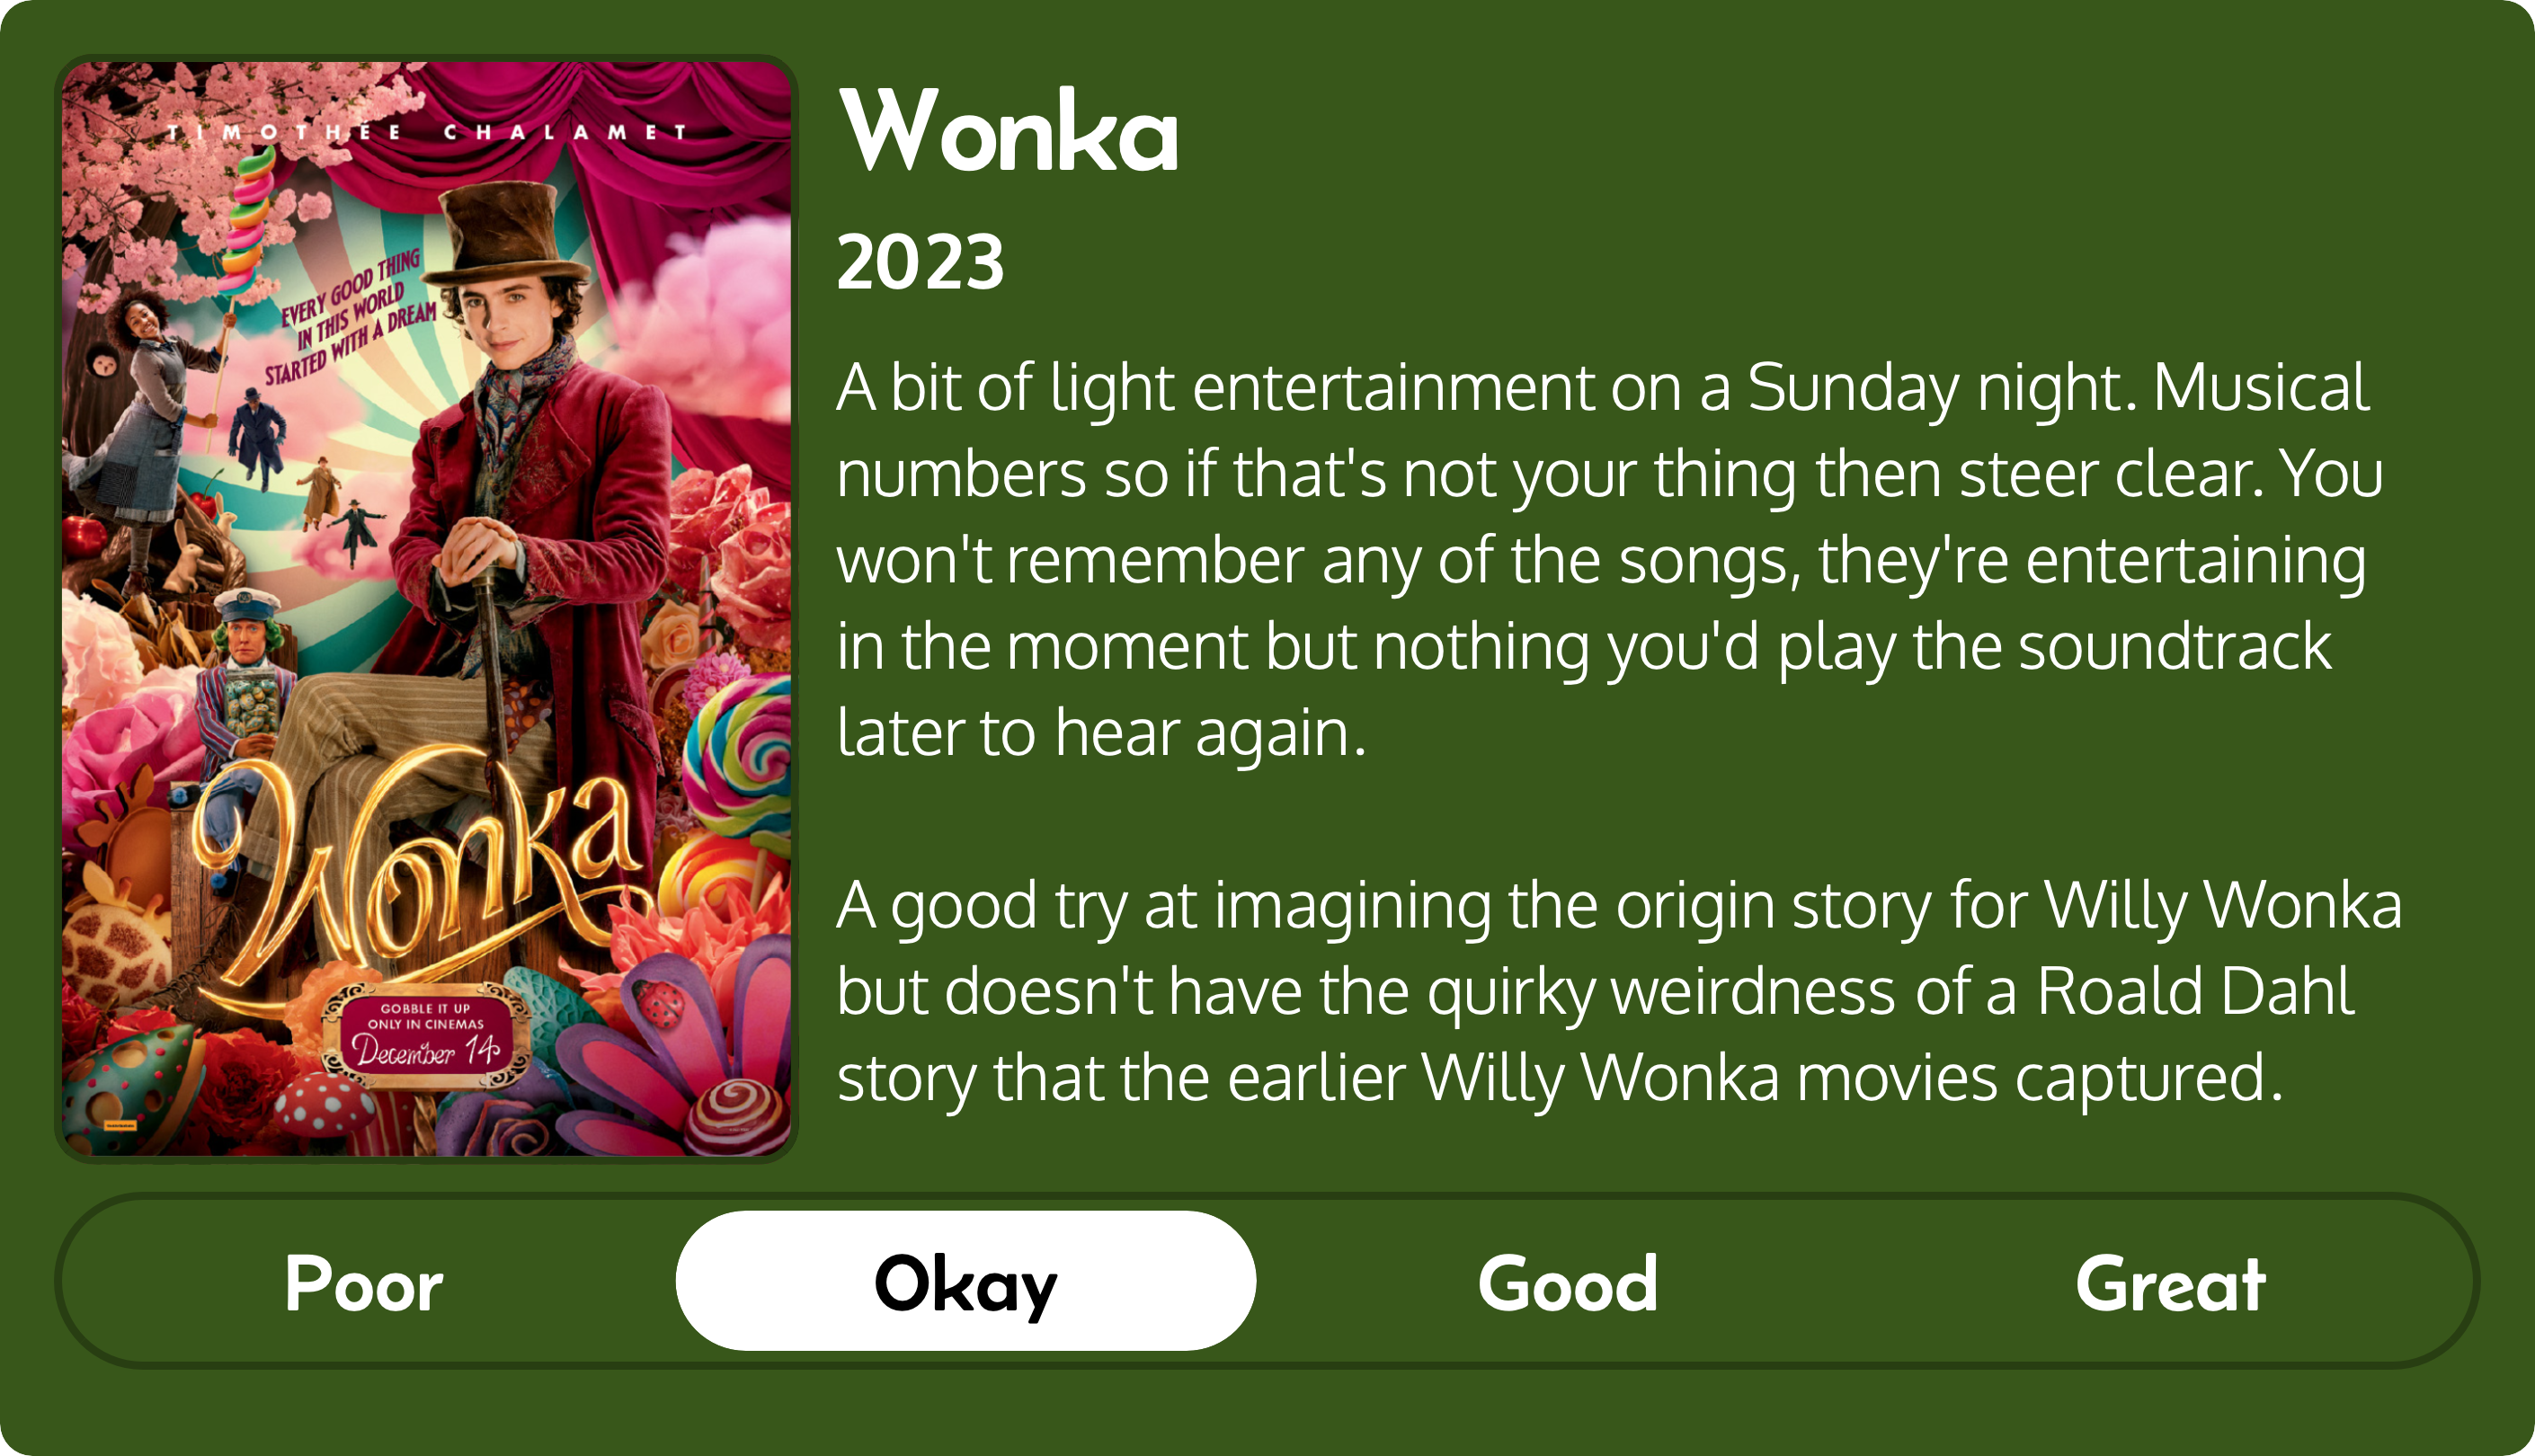 A rectangular image with a review of the movie - Wonka. The left third contains the movie poster and the review is in other two-thirds. Across the bottom is a rating of Poor Okay Good Great with Okay selected. The review reads: A bit of light entertainment on a Sunday night. Musical numbers so if that's not your thing then steer clear. You won't remember any of the songs, they're entertaining in the moment but nothing you'd play the soundtrack later to hear again. A good try at imagining the origin story for Willy Wonka but doesn't have the quirky weirdness of a Roald Dahl story that the earlier Willy Wonka movies captured.